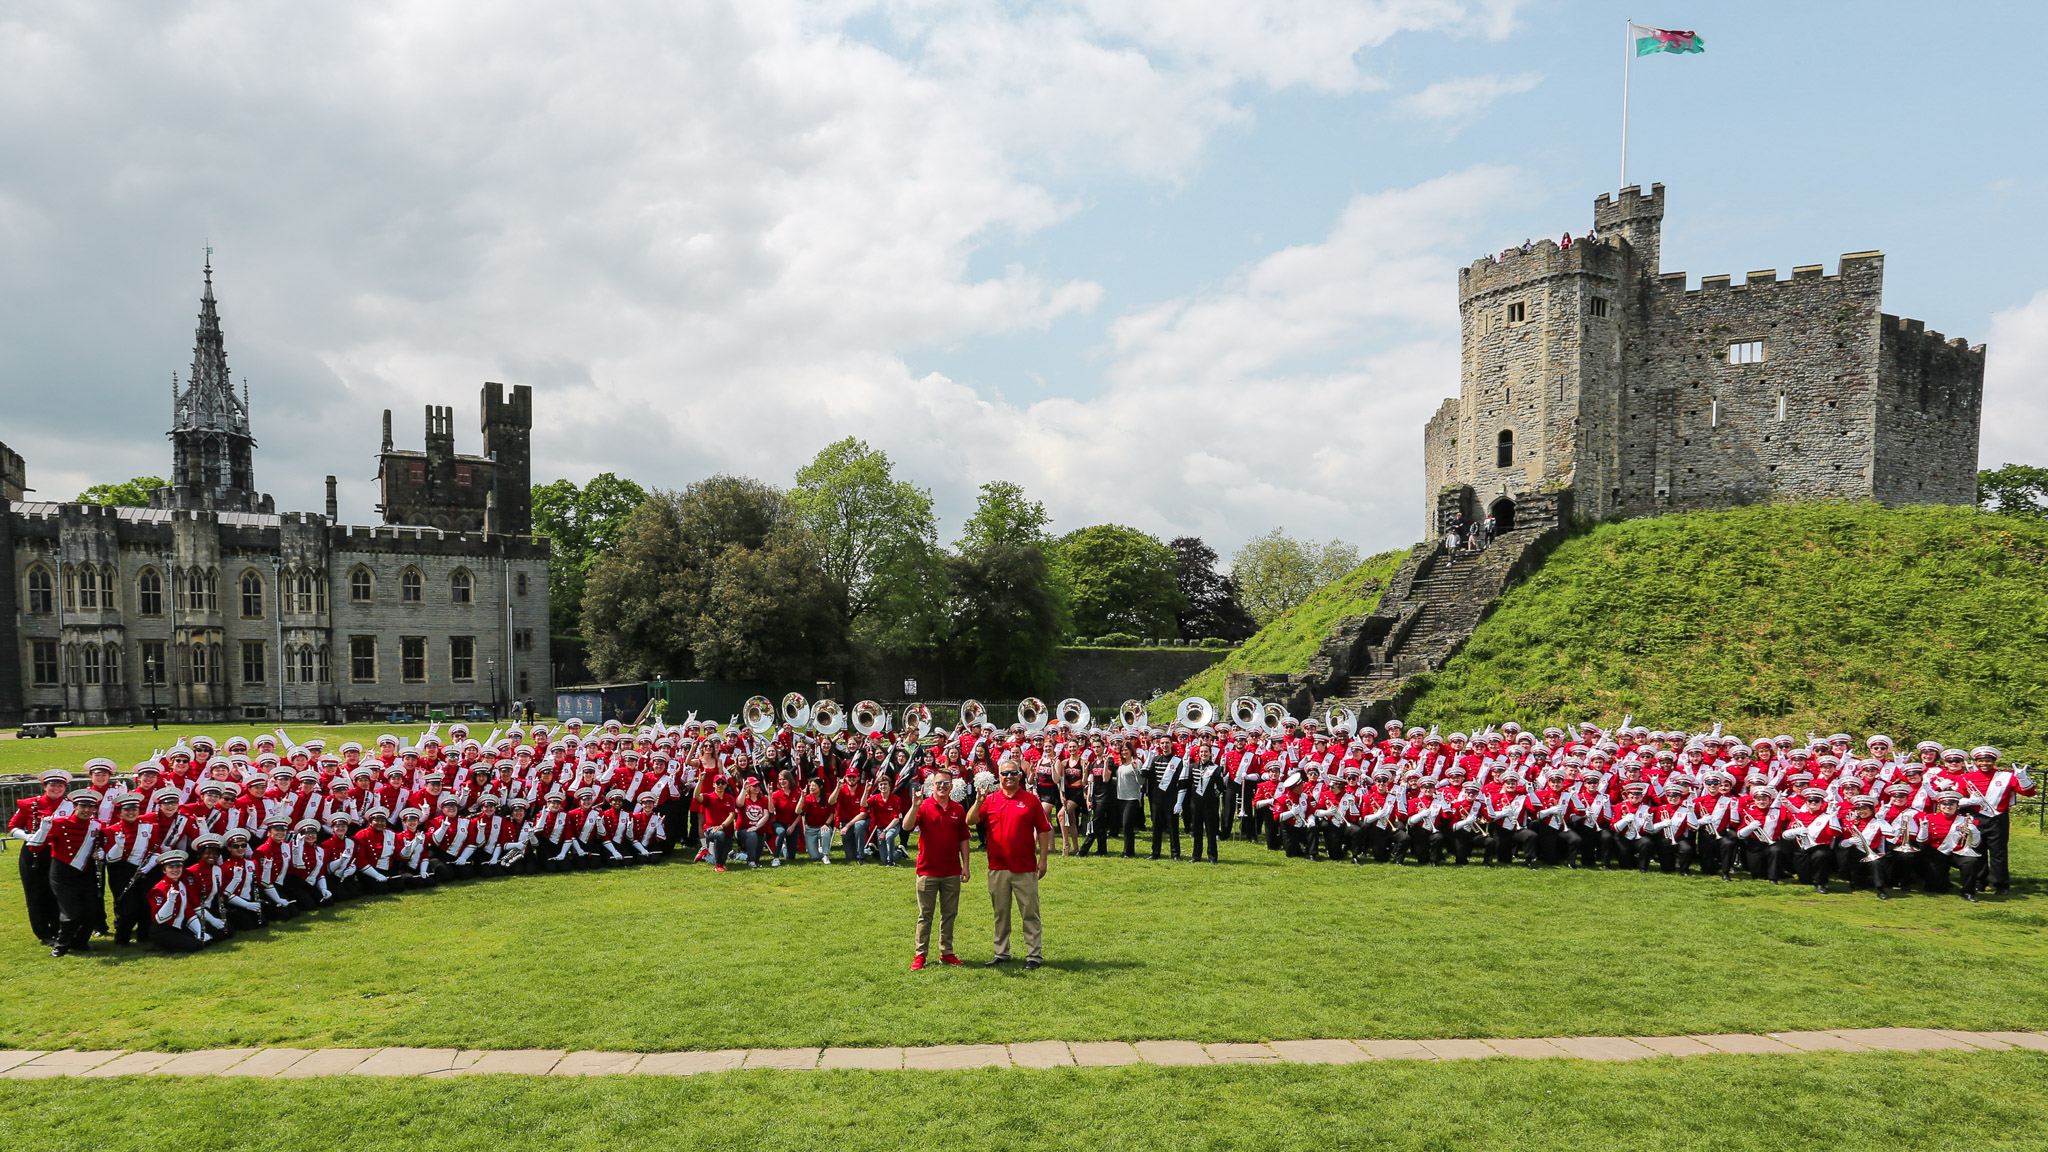 Two band directors stand with their marching band of about 250 students in front of the welsh Cardiff Castle.